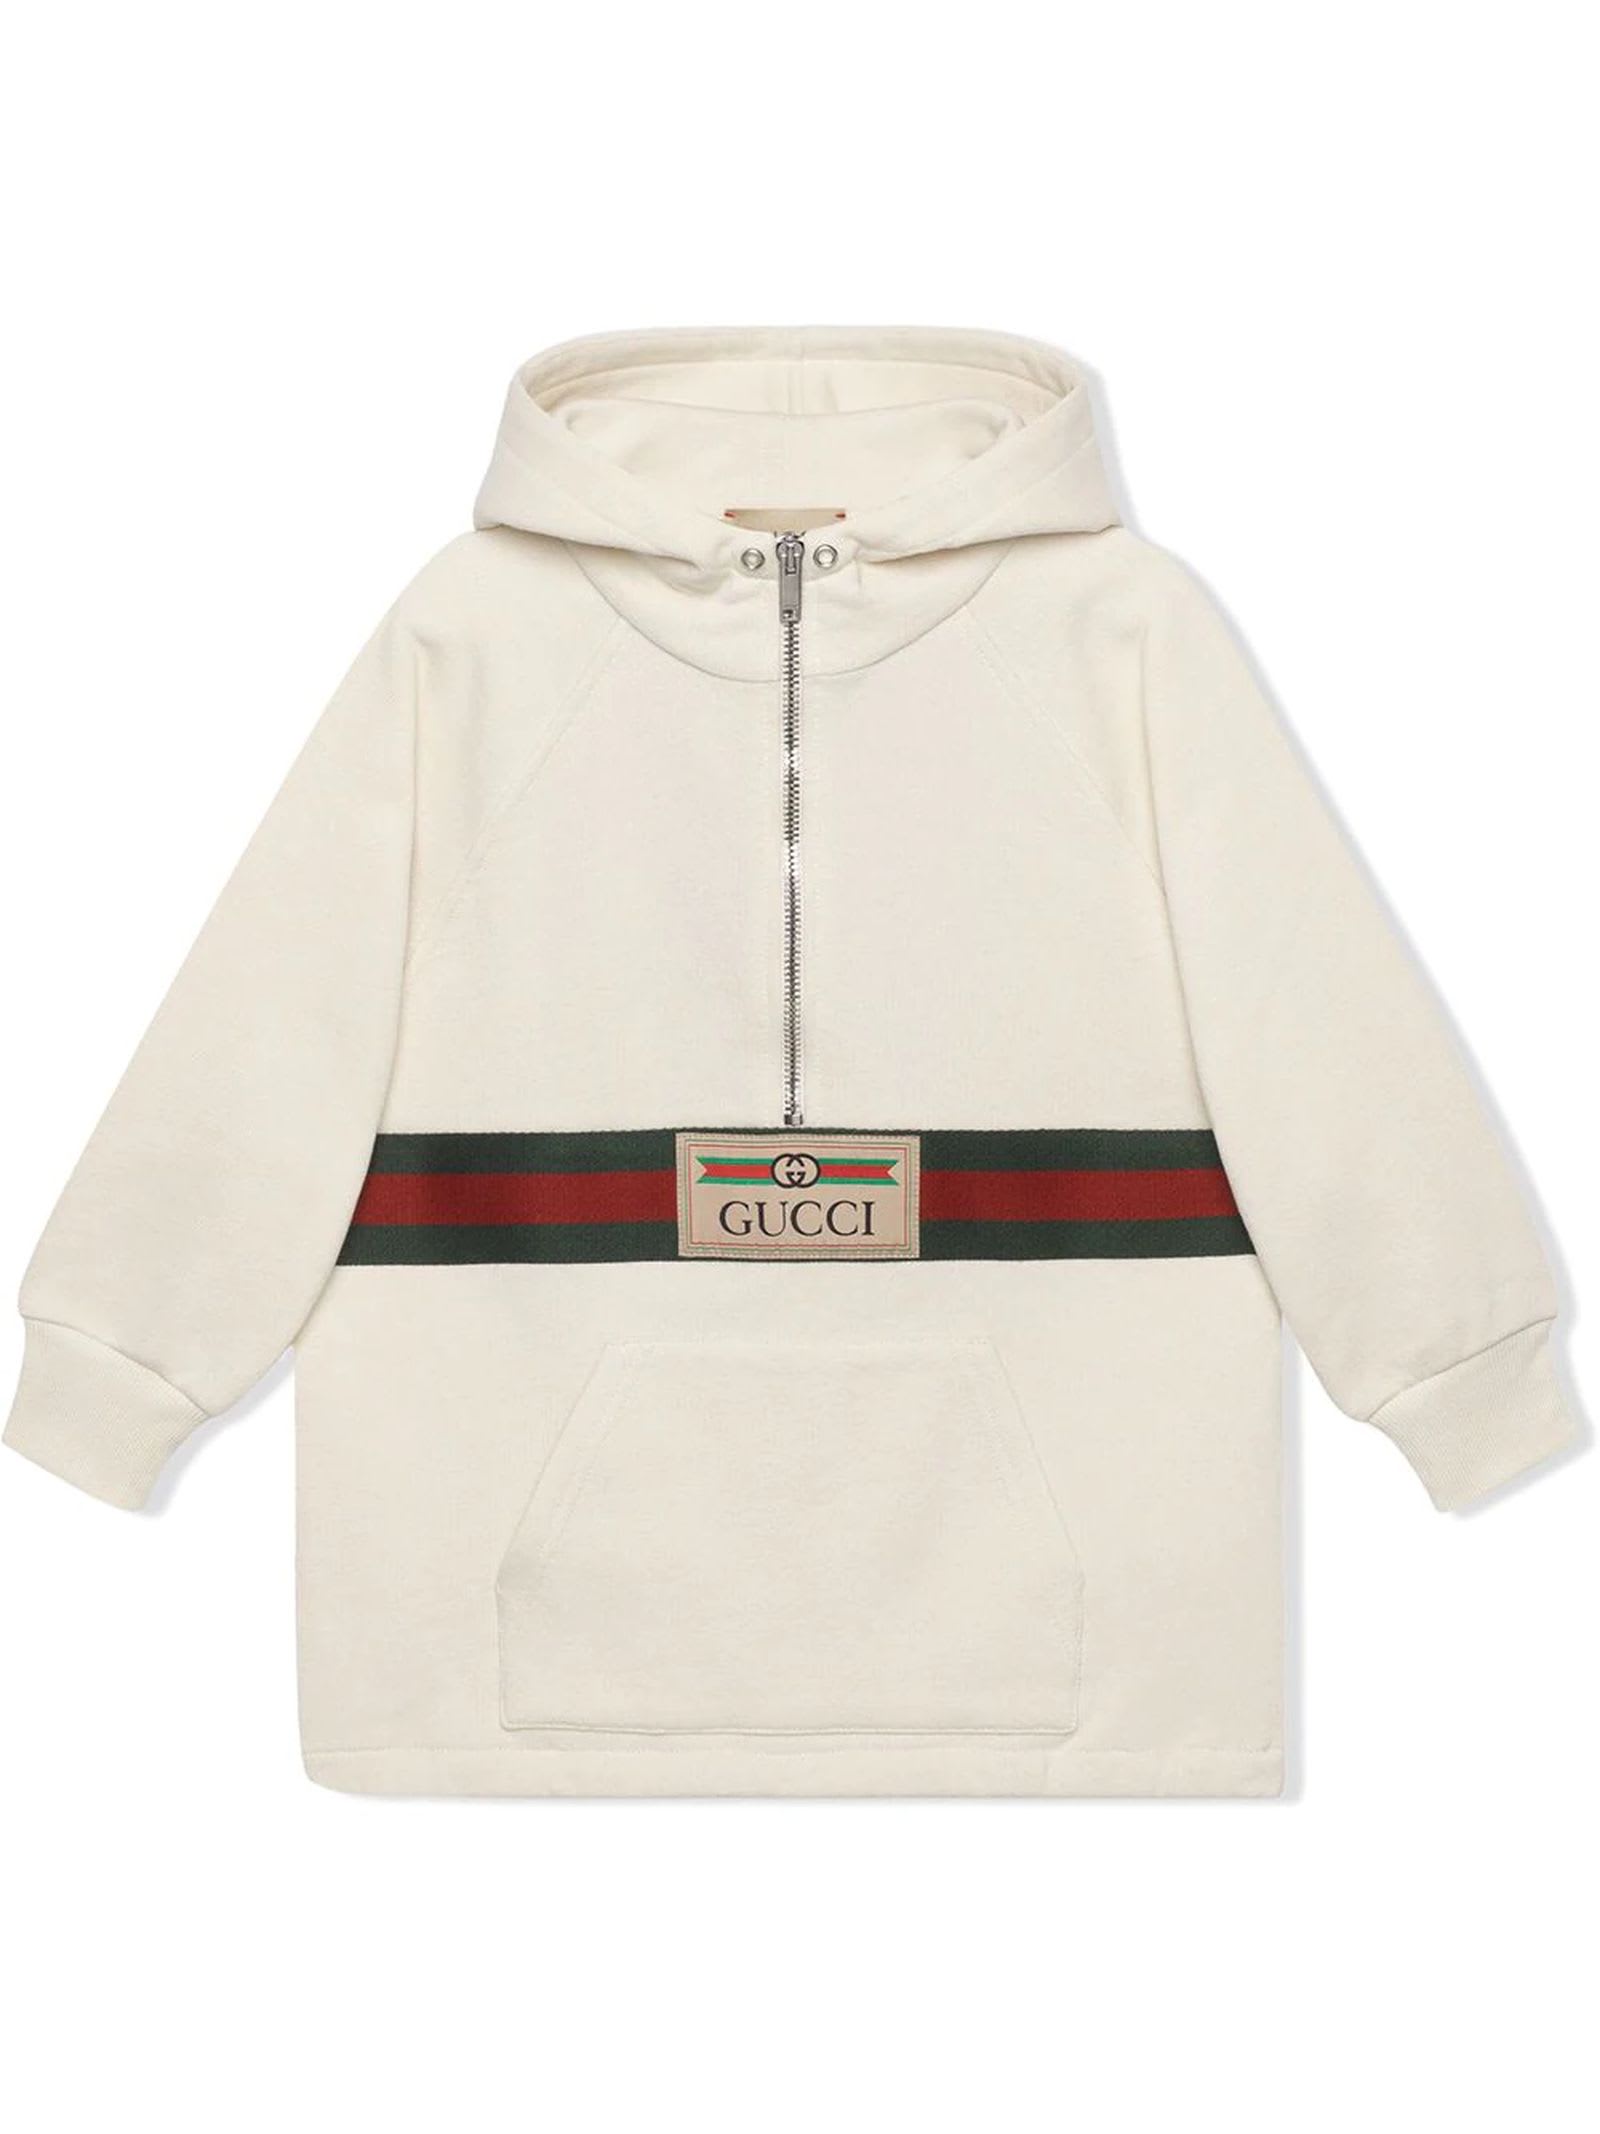 Gucci White Felted Cotton Jersey Jacket